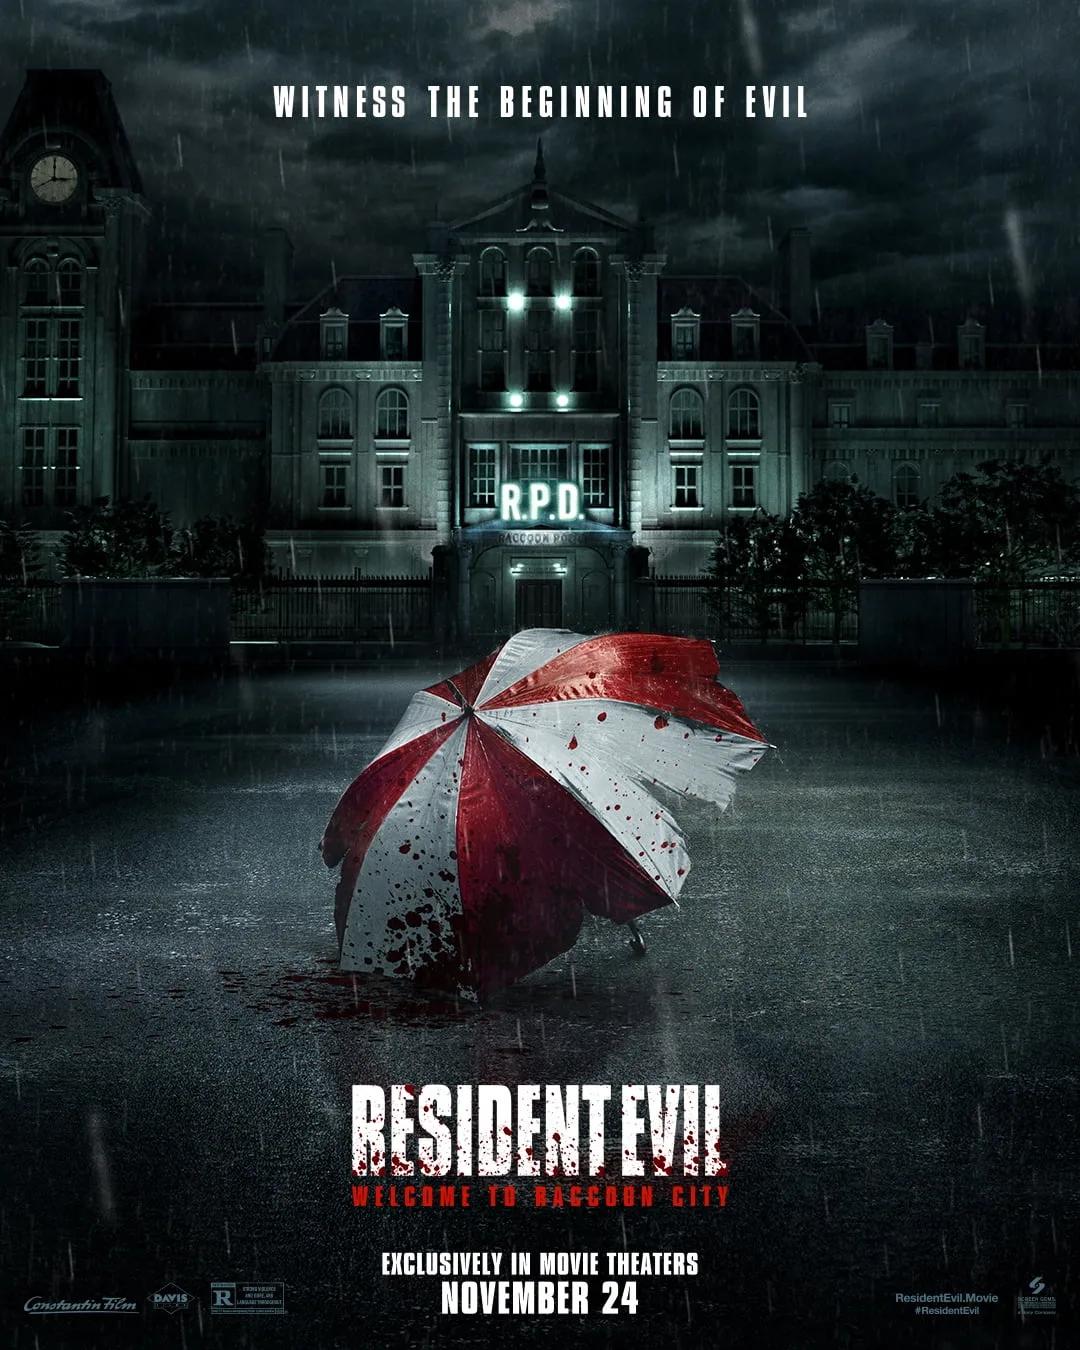 Welcome to Raccoon City, once the booming home of pharmaceutical giant Umbrella Corp. The company's exodus left the city a wasteland, a dying town with great evil brewing below the surface.